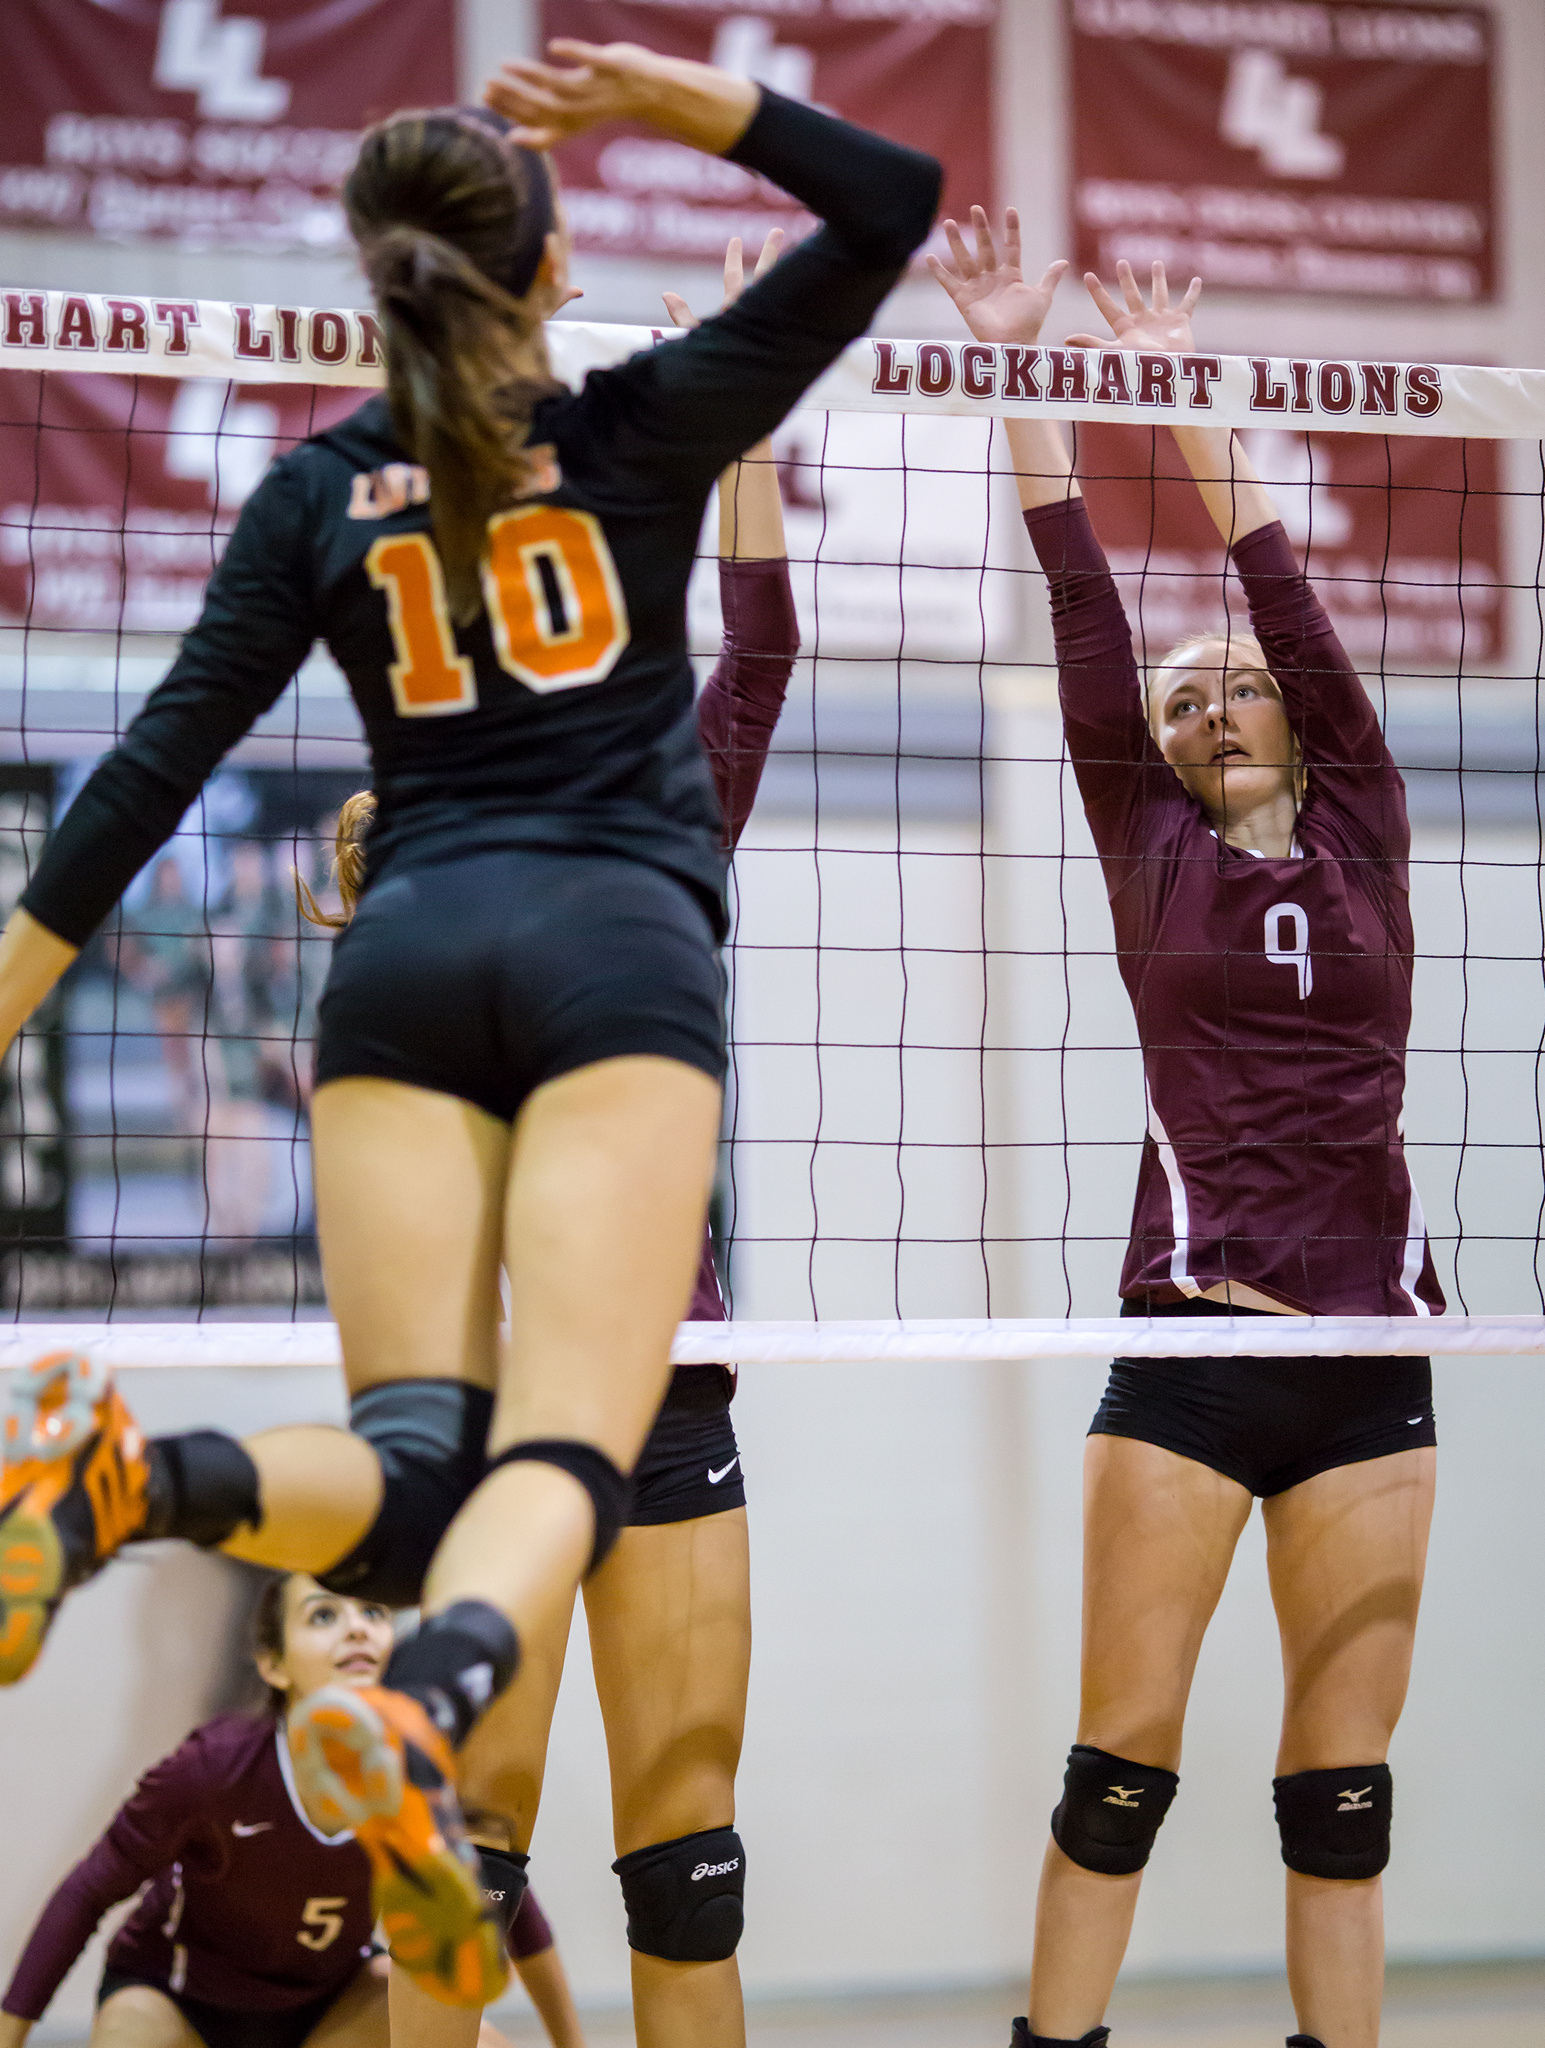 You will need to take pride in making an aggressive attempt to dig any and every ball in your immediate area up so your volleyball team has another chance to play the ball for a point or side out.